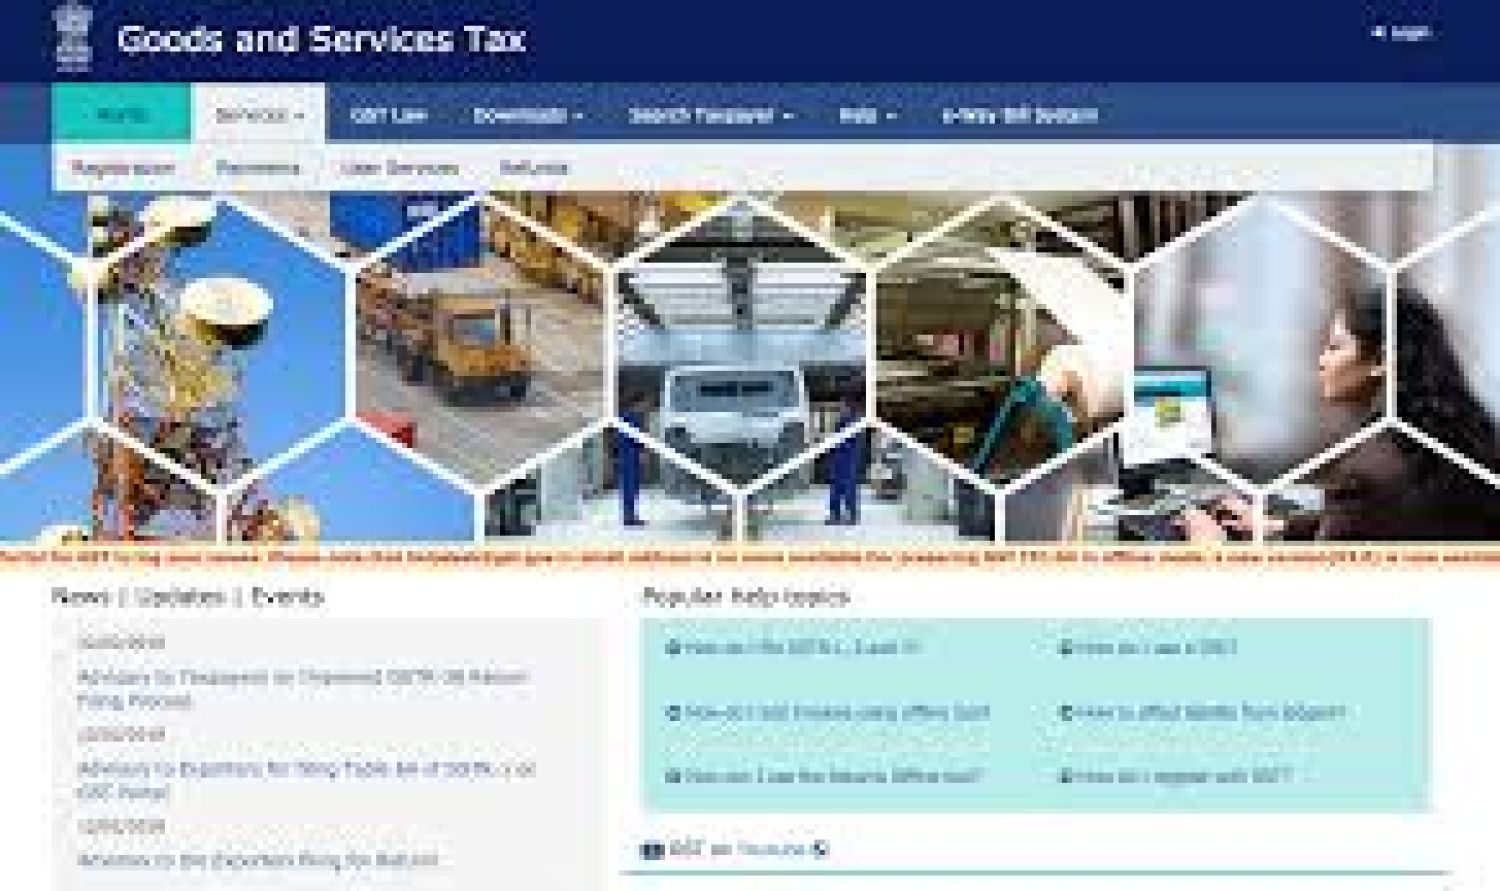 How to Handling negative IGST liability under the GST System in India